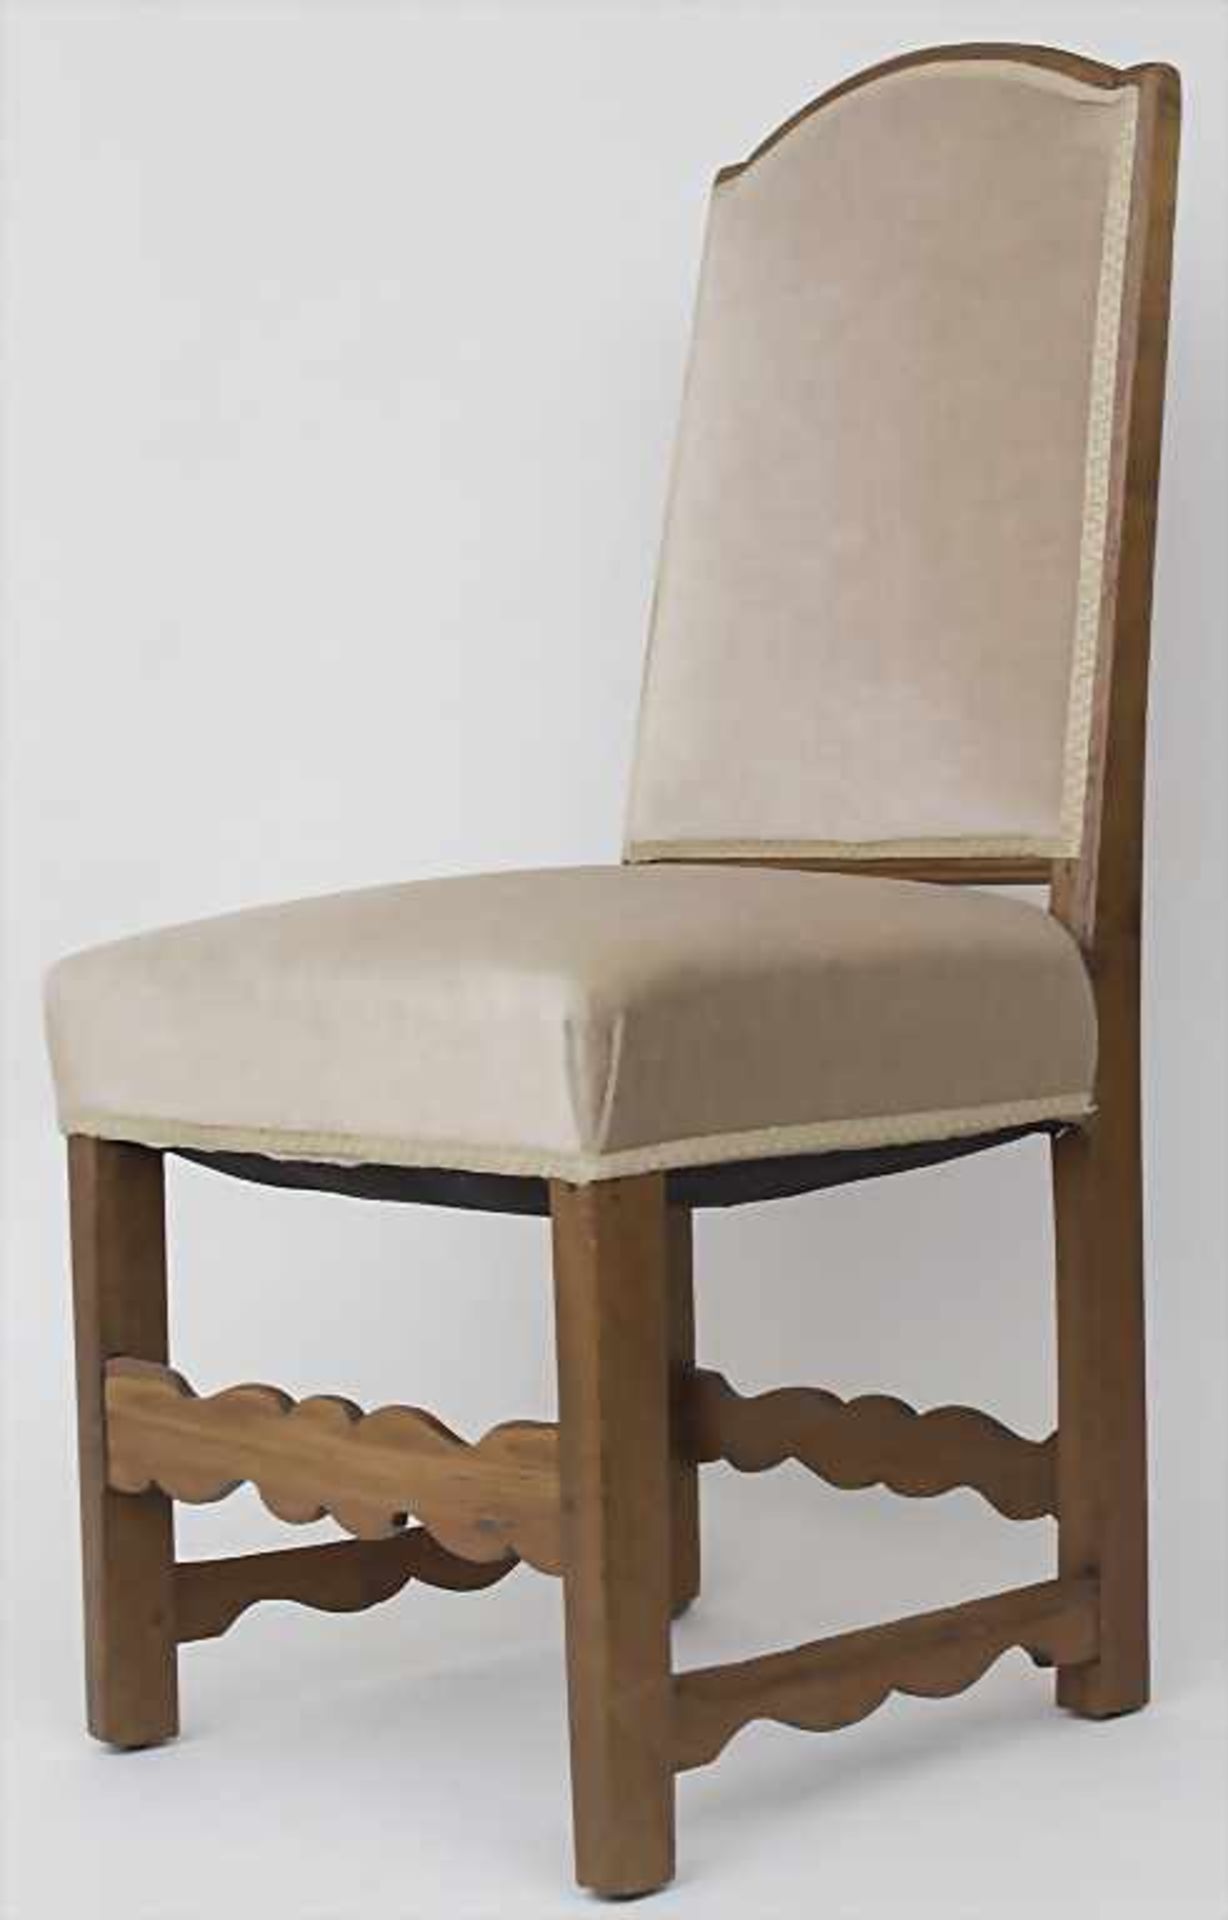 Stuhl mit Veloursbezug / A chair with velour cover - Image 2 of 4